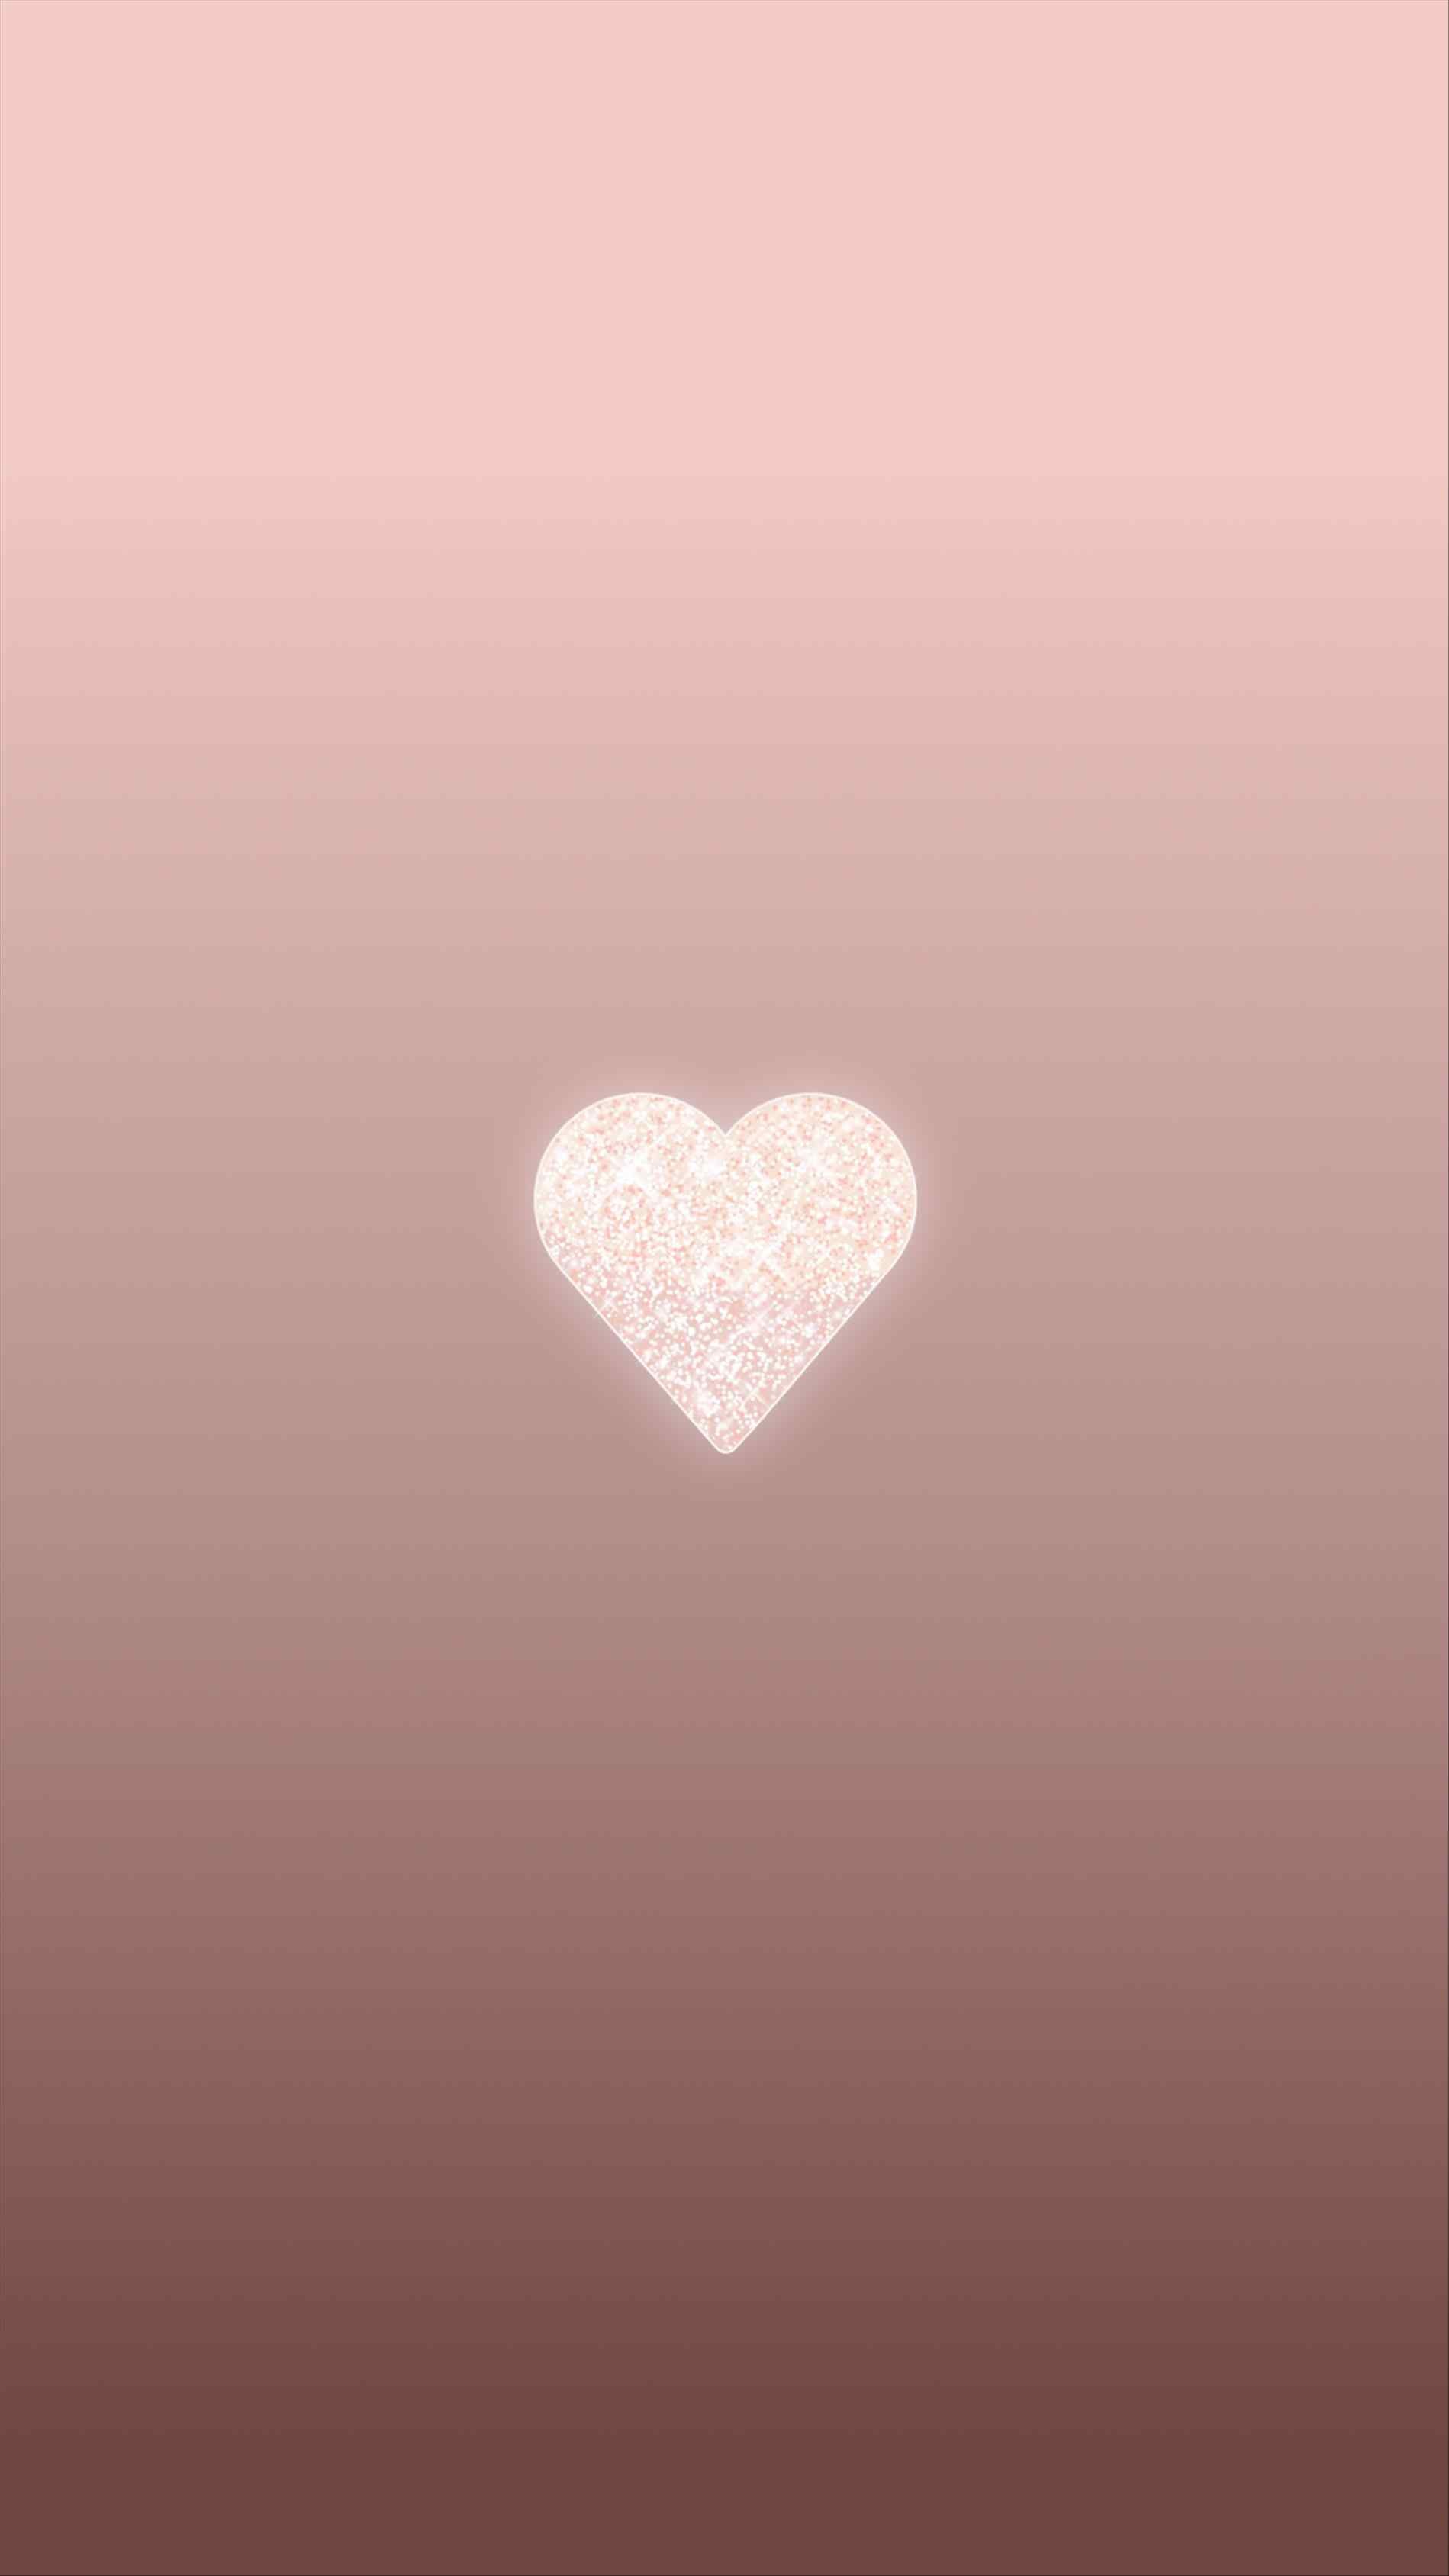 Tumblr Gold Background Wallpaper Iphone St Birthday Rose Gold Background 1899x3377 Wallpaper Teahub Io Rose gold background or texture and gradients shadow. tumblr gold background wallpaper iphone